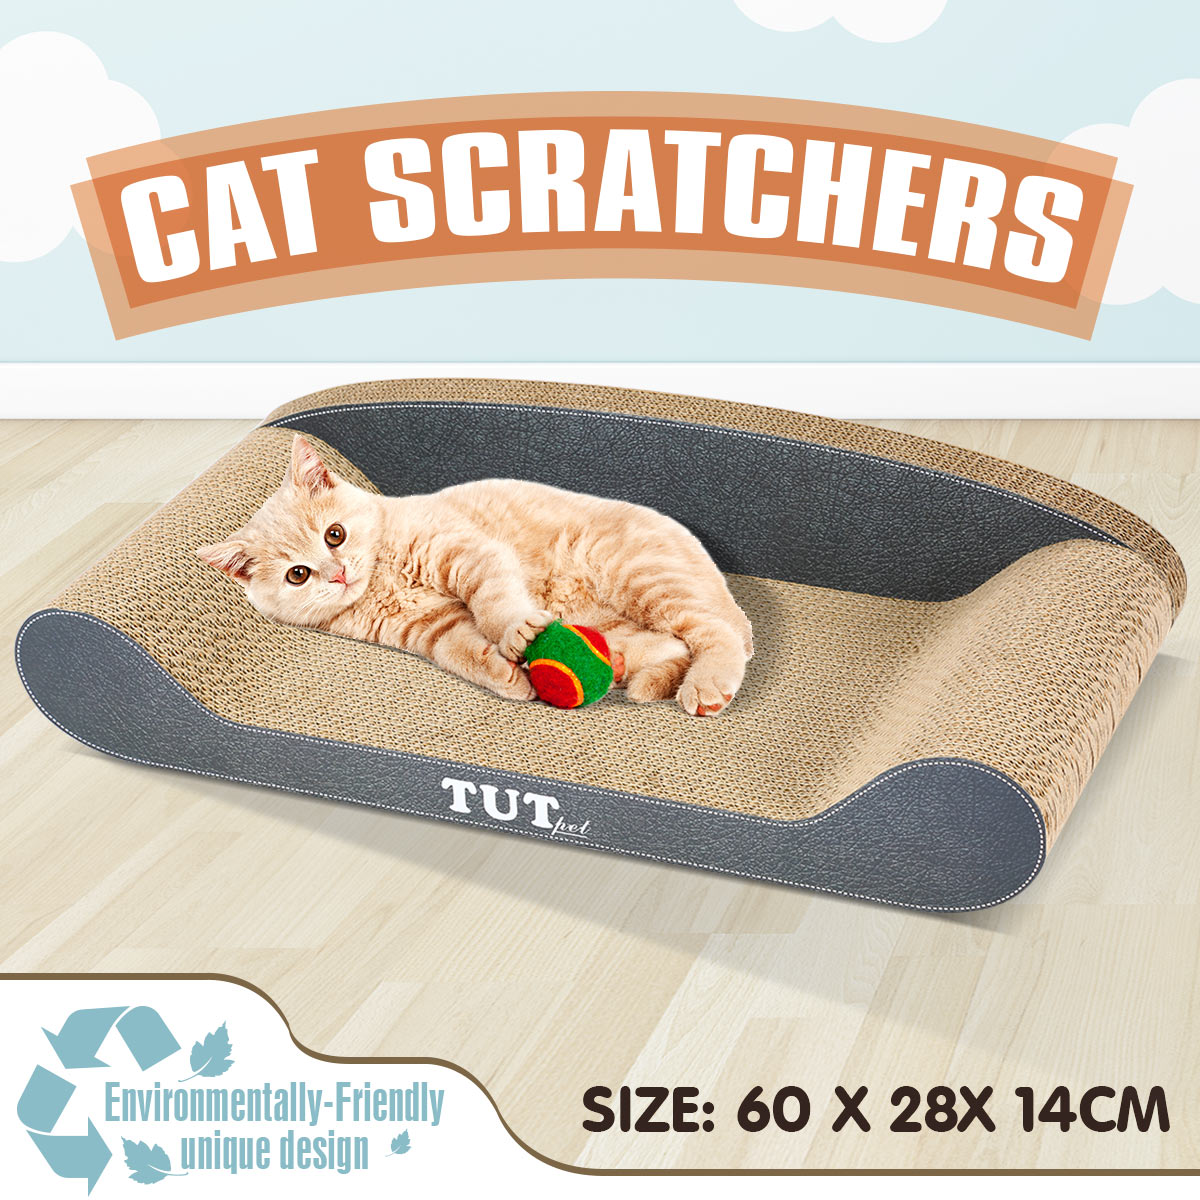 Sofa Shape Cardboard Cat Scratcher Claw Scratching Play Mat W/High-Strength Corrugated Material bit.ly/3Jzpq3Q #sofa #bed #cat #kitten #catlife #cathealth #scratchingpost #playtime